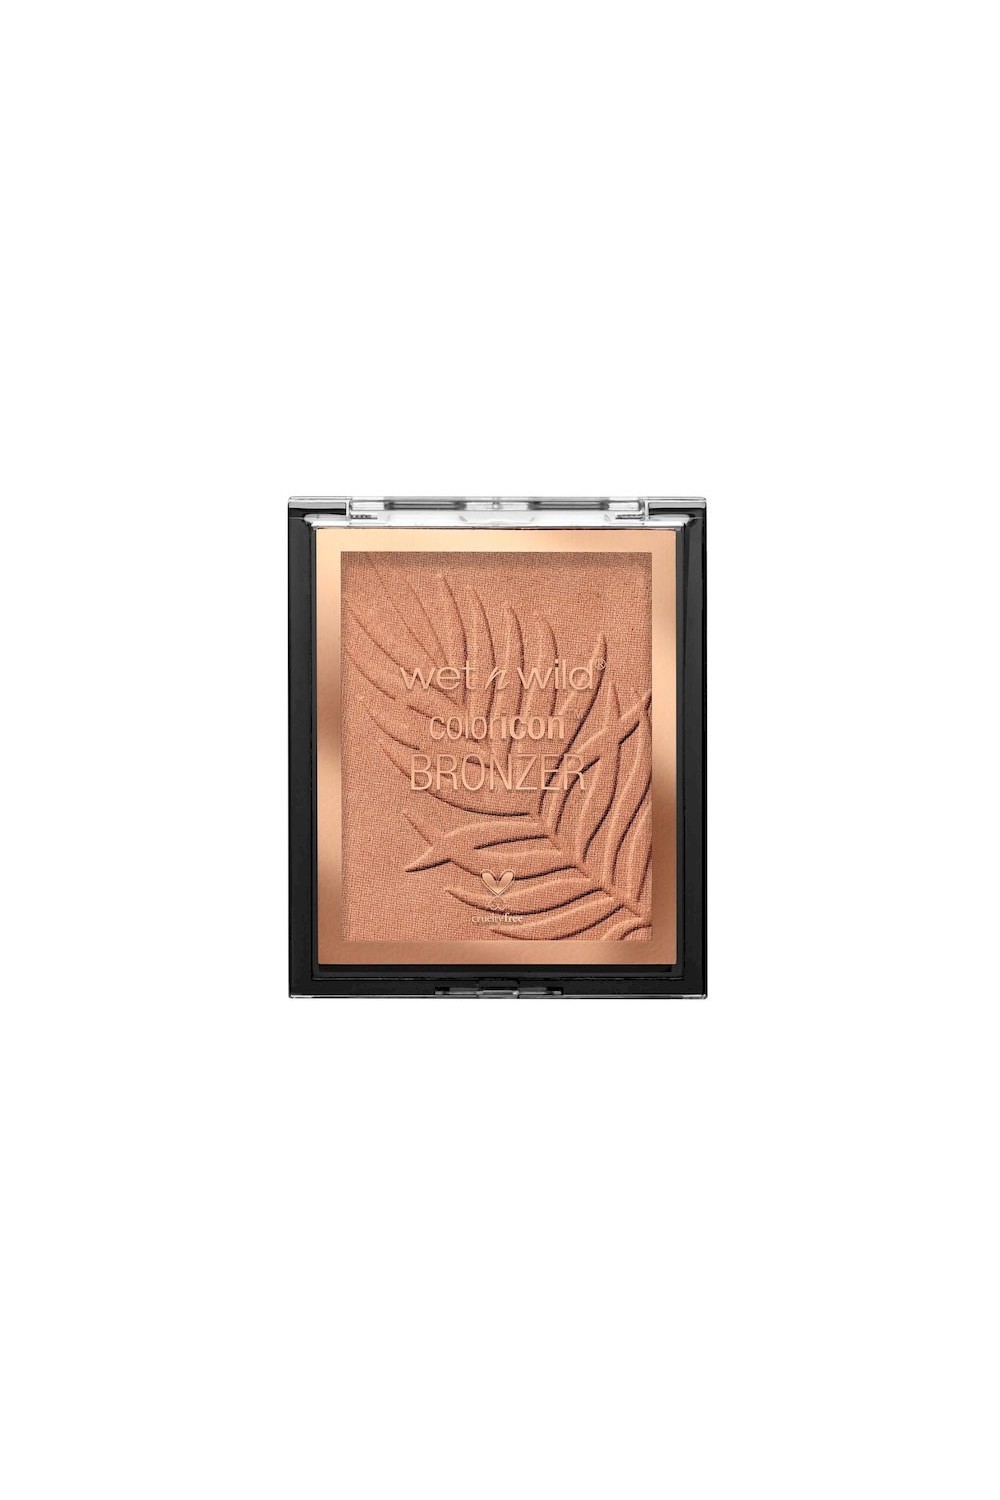 Wet N Wild Color Icon Bronzer E740A Ticket To Brazil